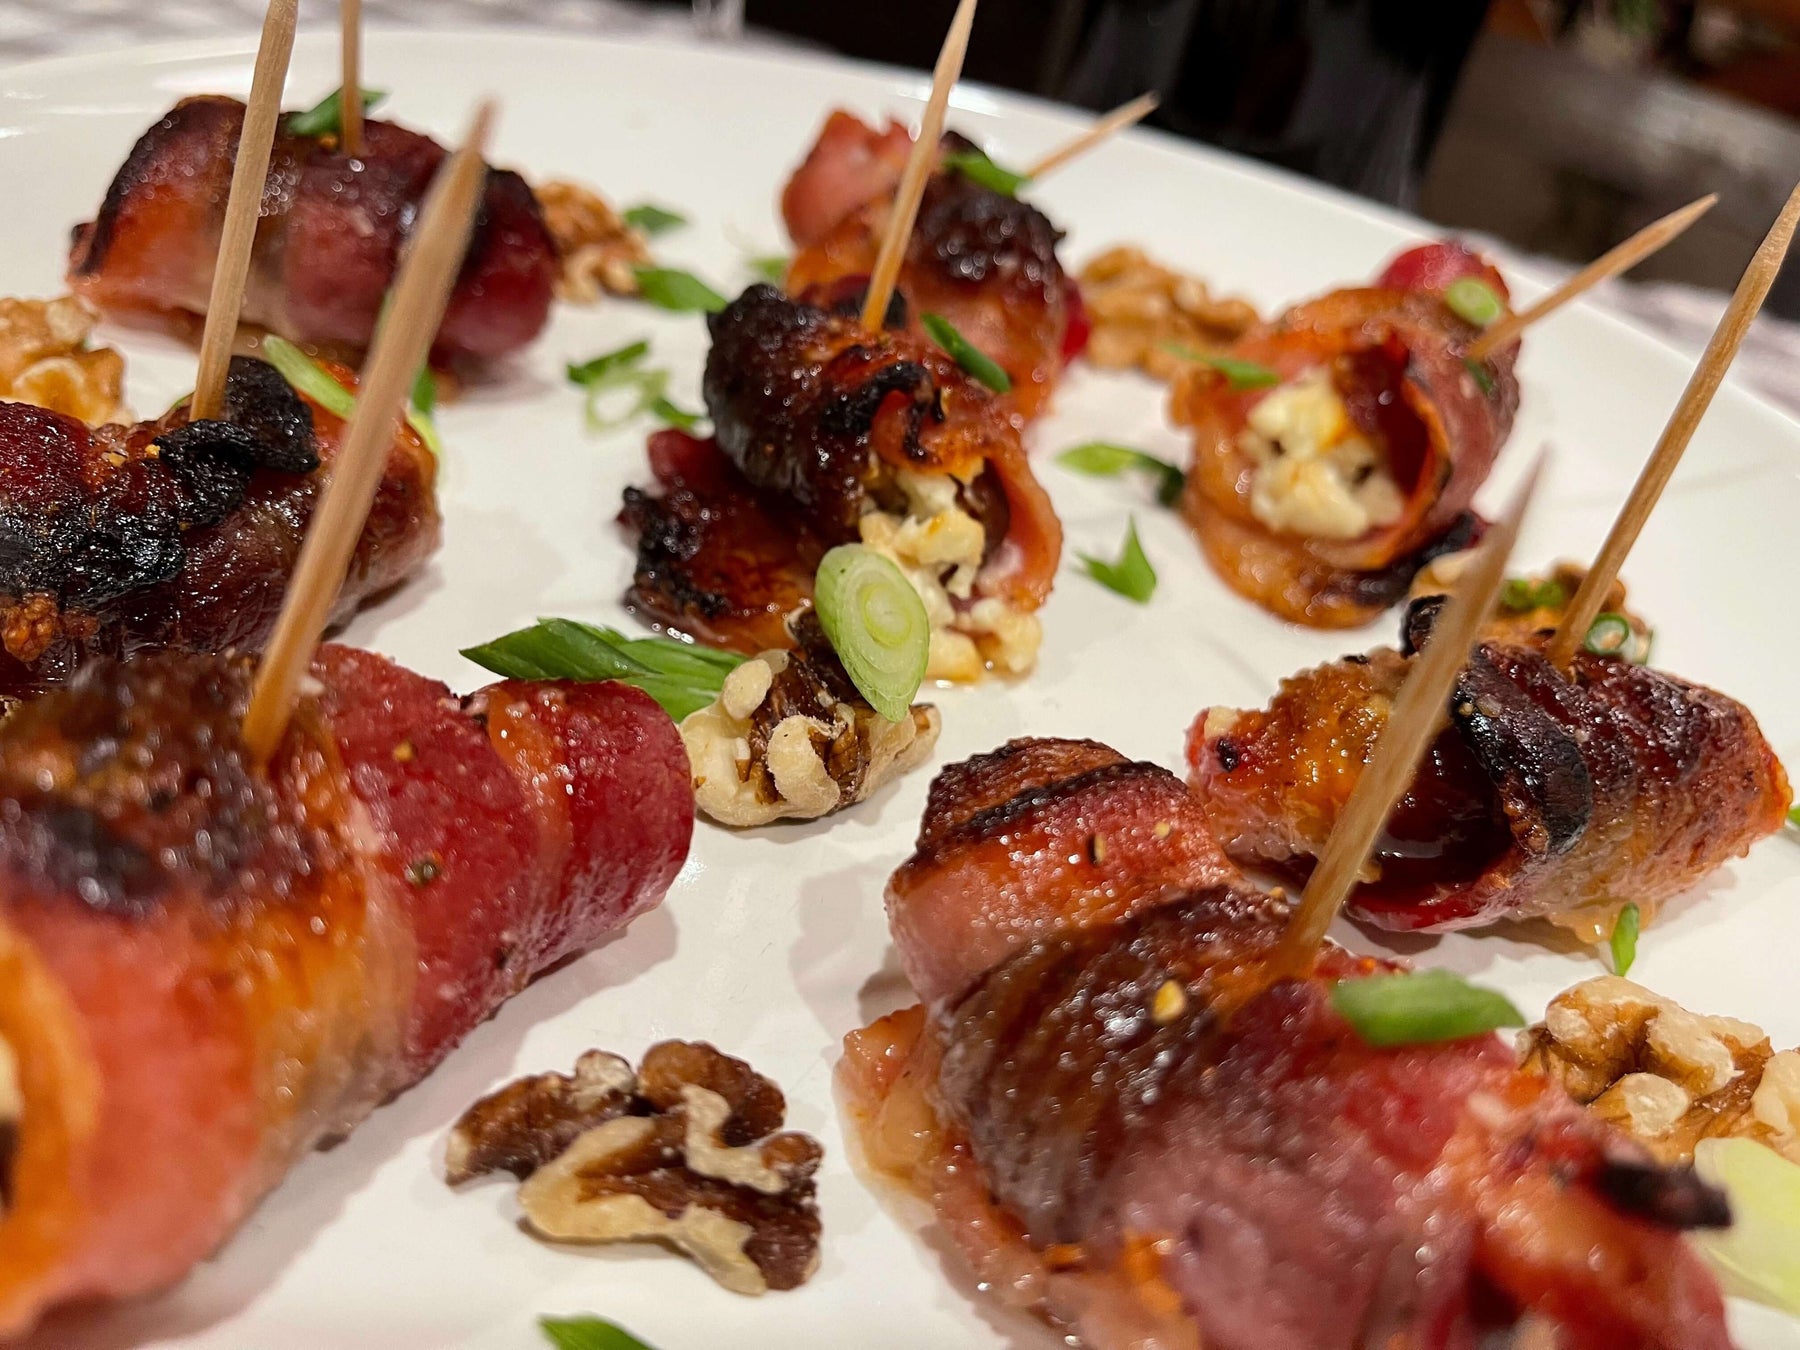 Goat Cheese Stuffed Bacon Wrapped Dates with Honey Drizzle